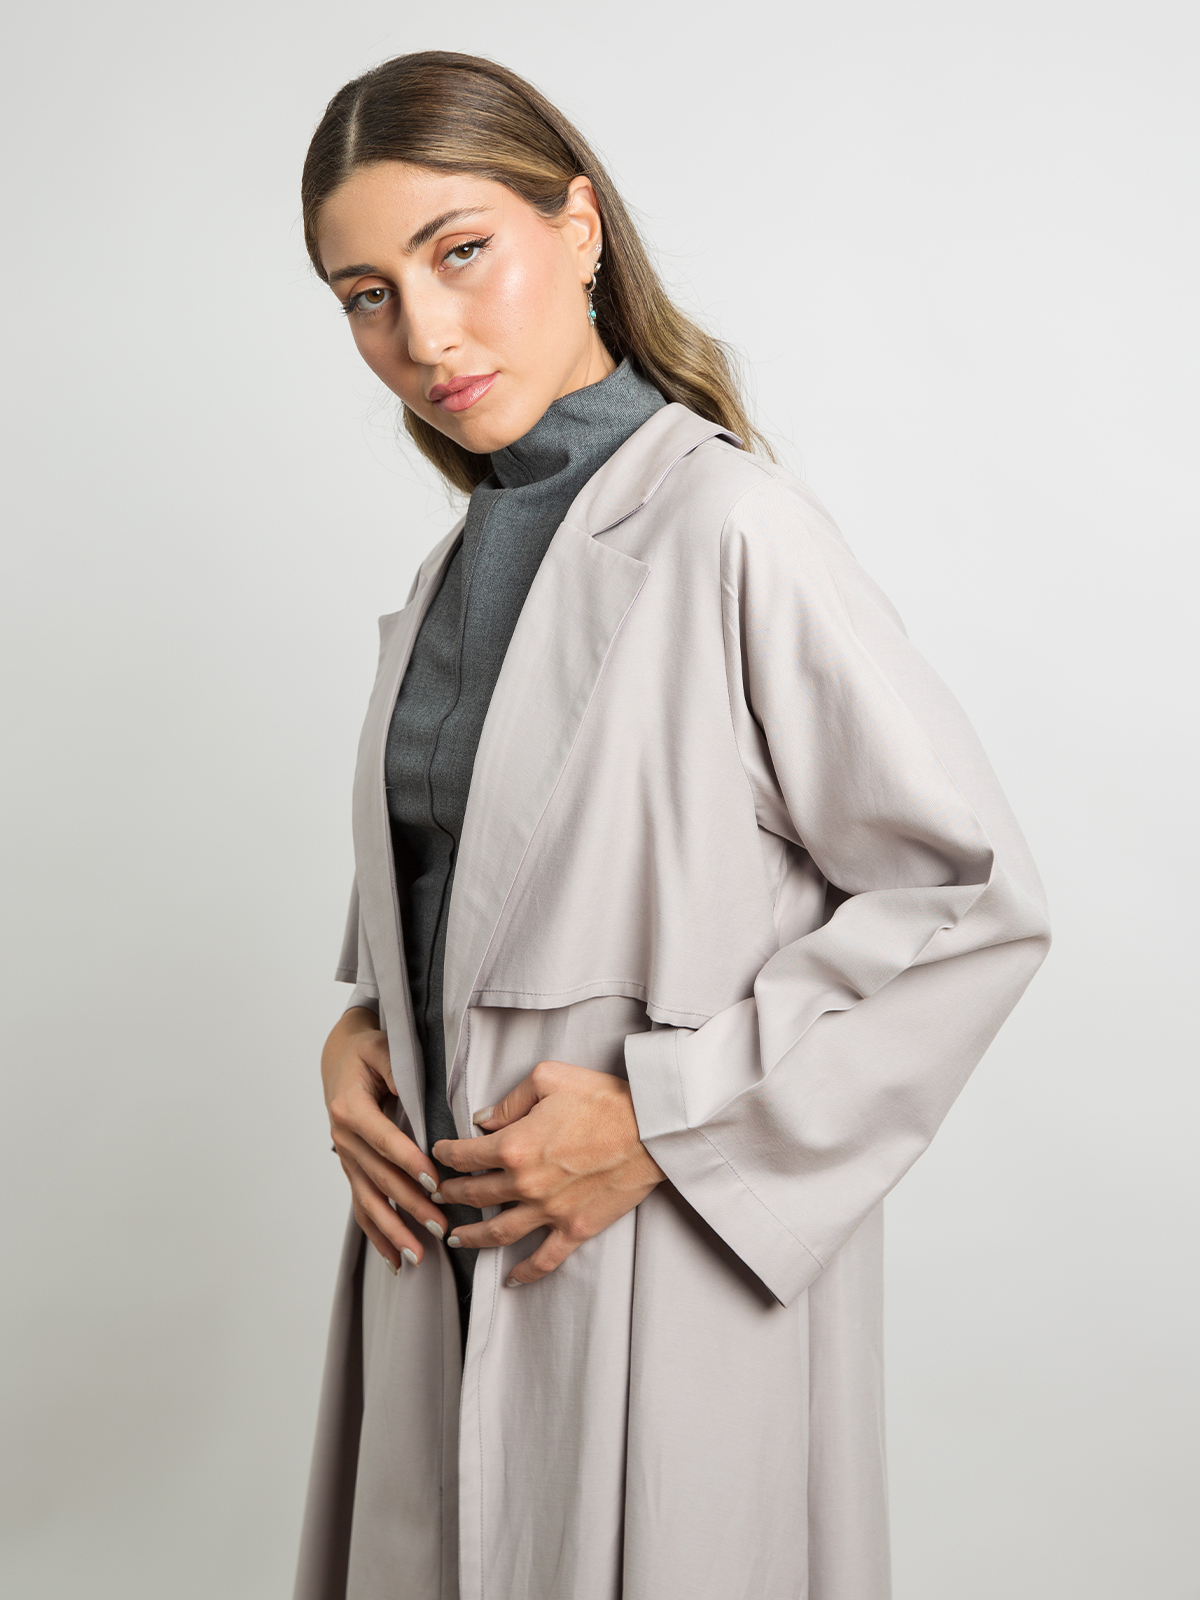 Lavender - A Cut Long Open Trench Abaya in Natural Soft Fabric